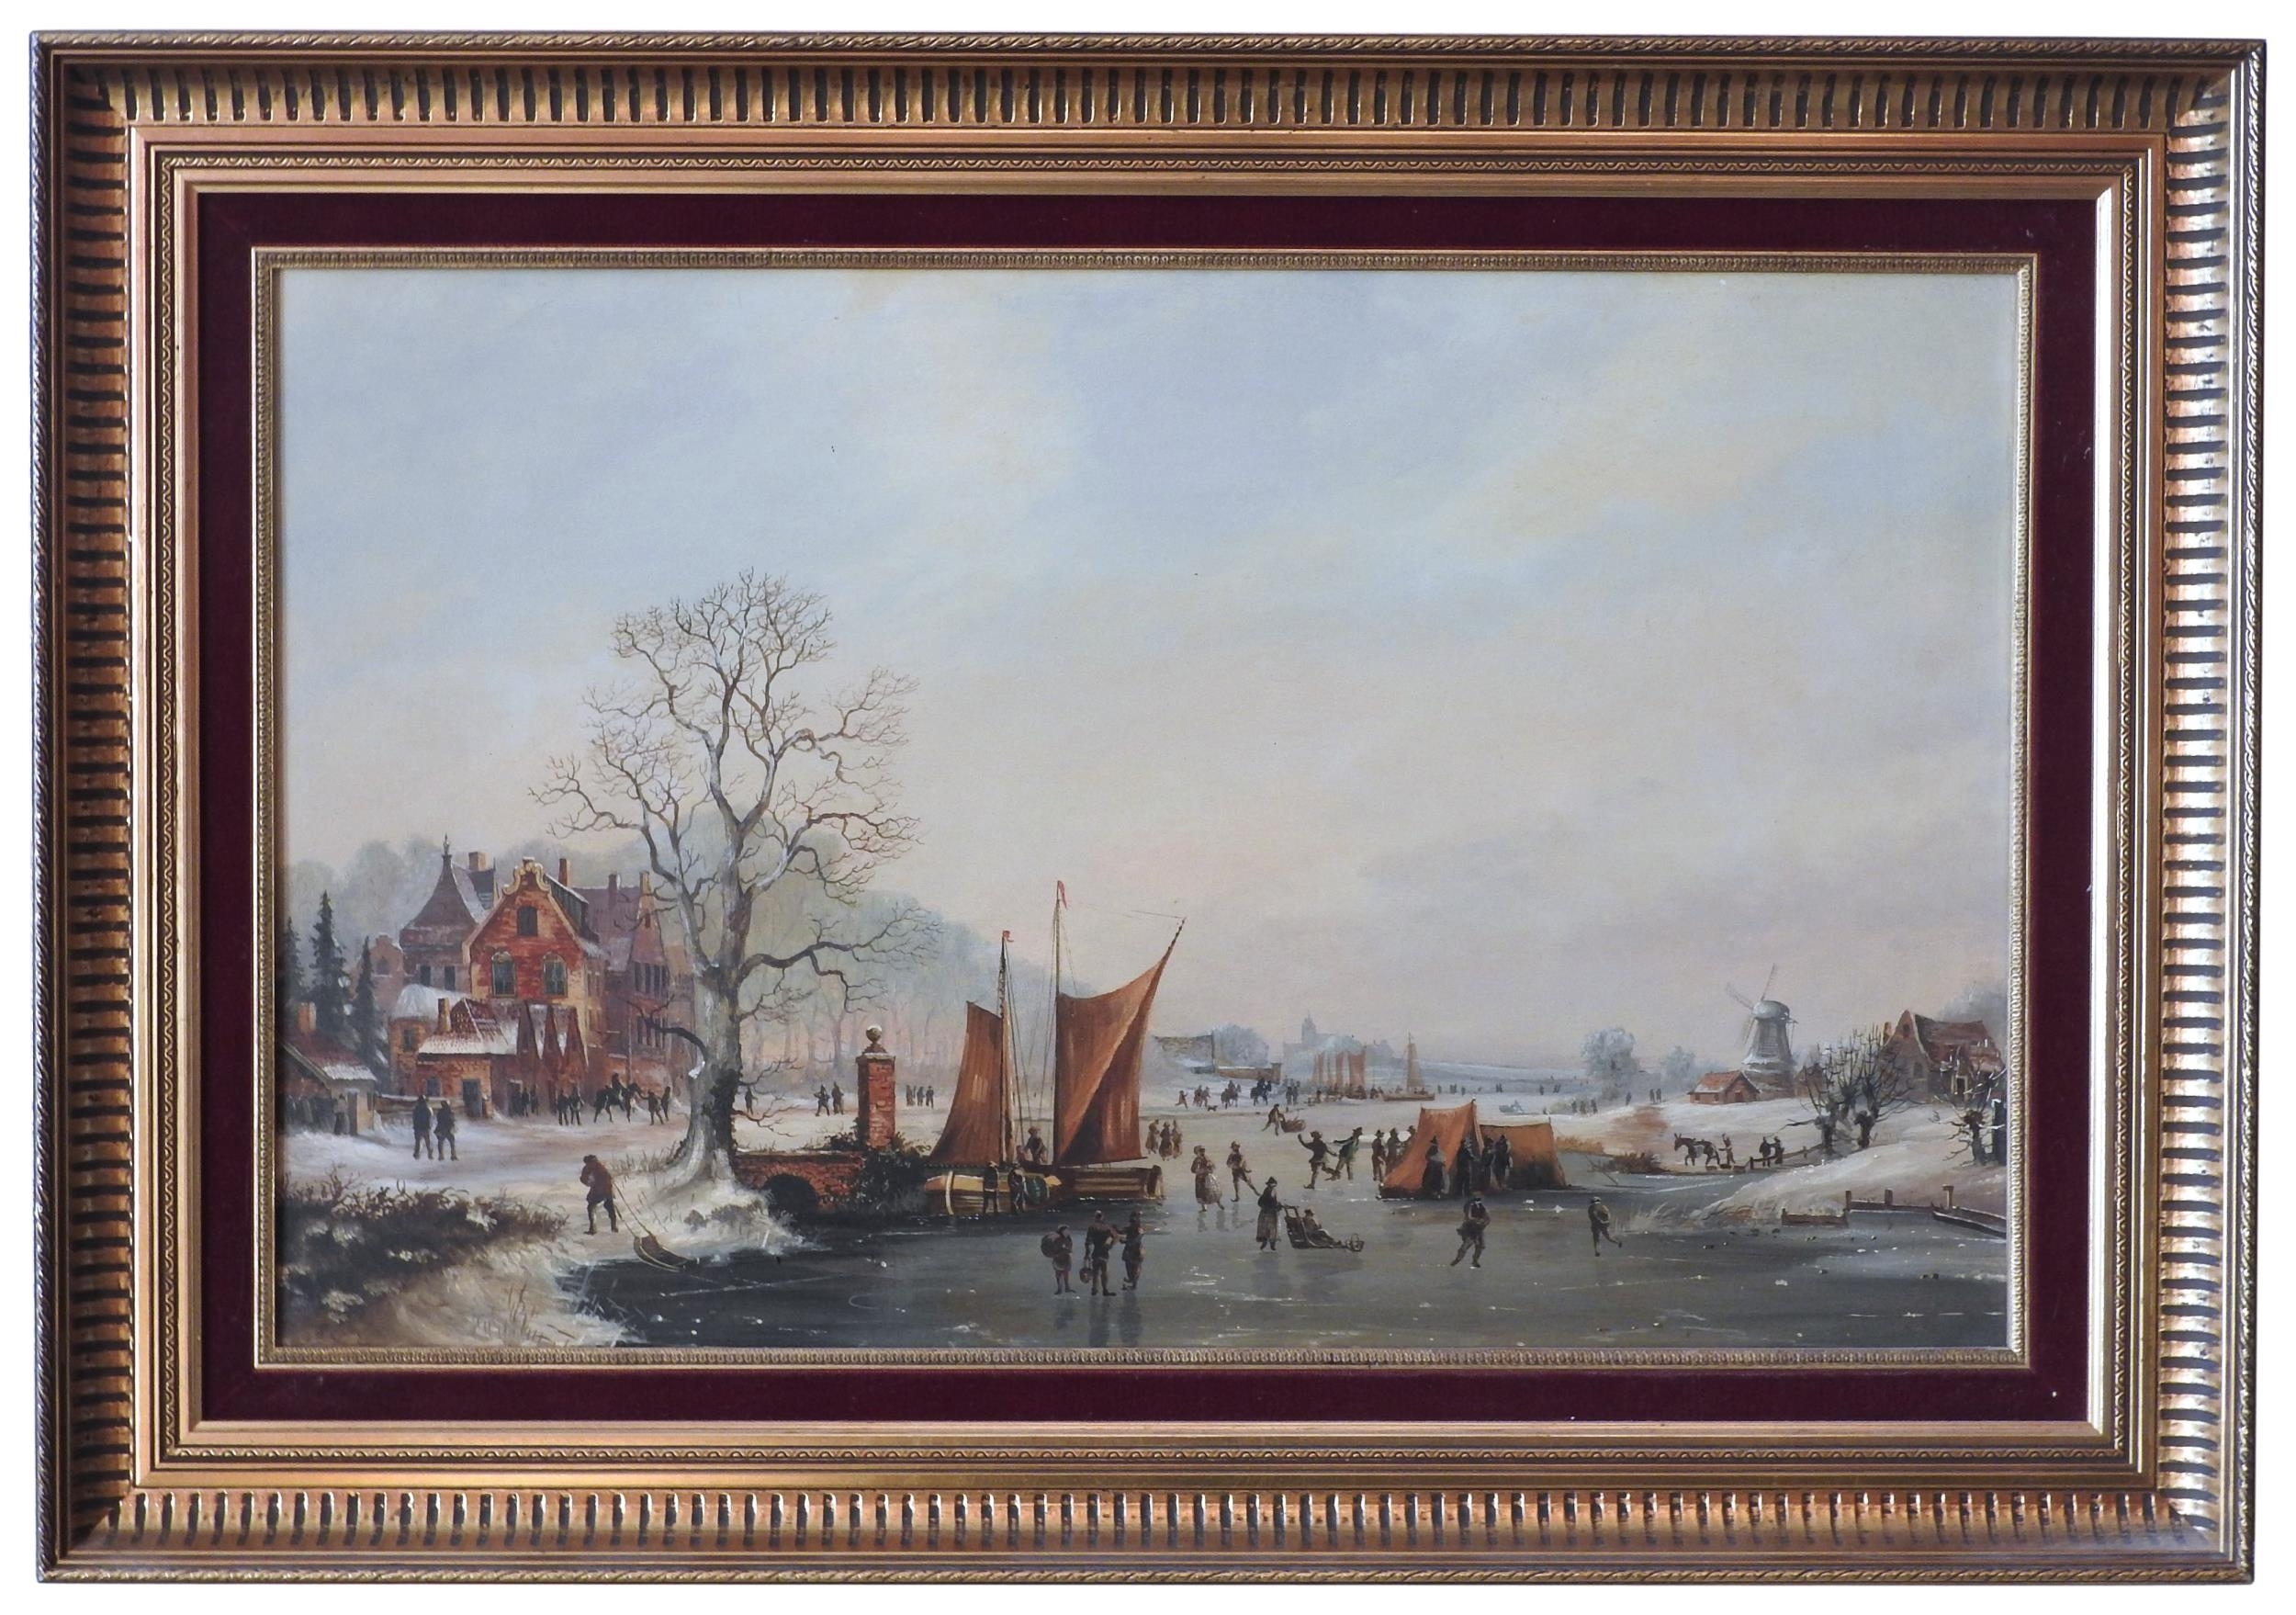 depicting a winter scene with figures skating on a frozen river with boats and a windmill beyond - Hendrick Avercamp